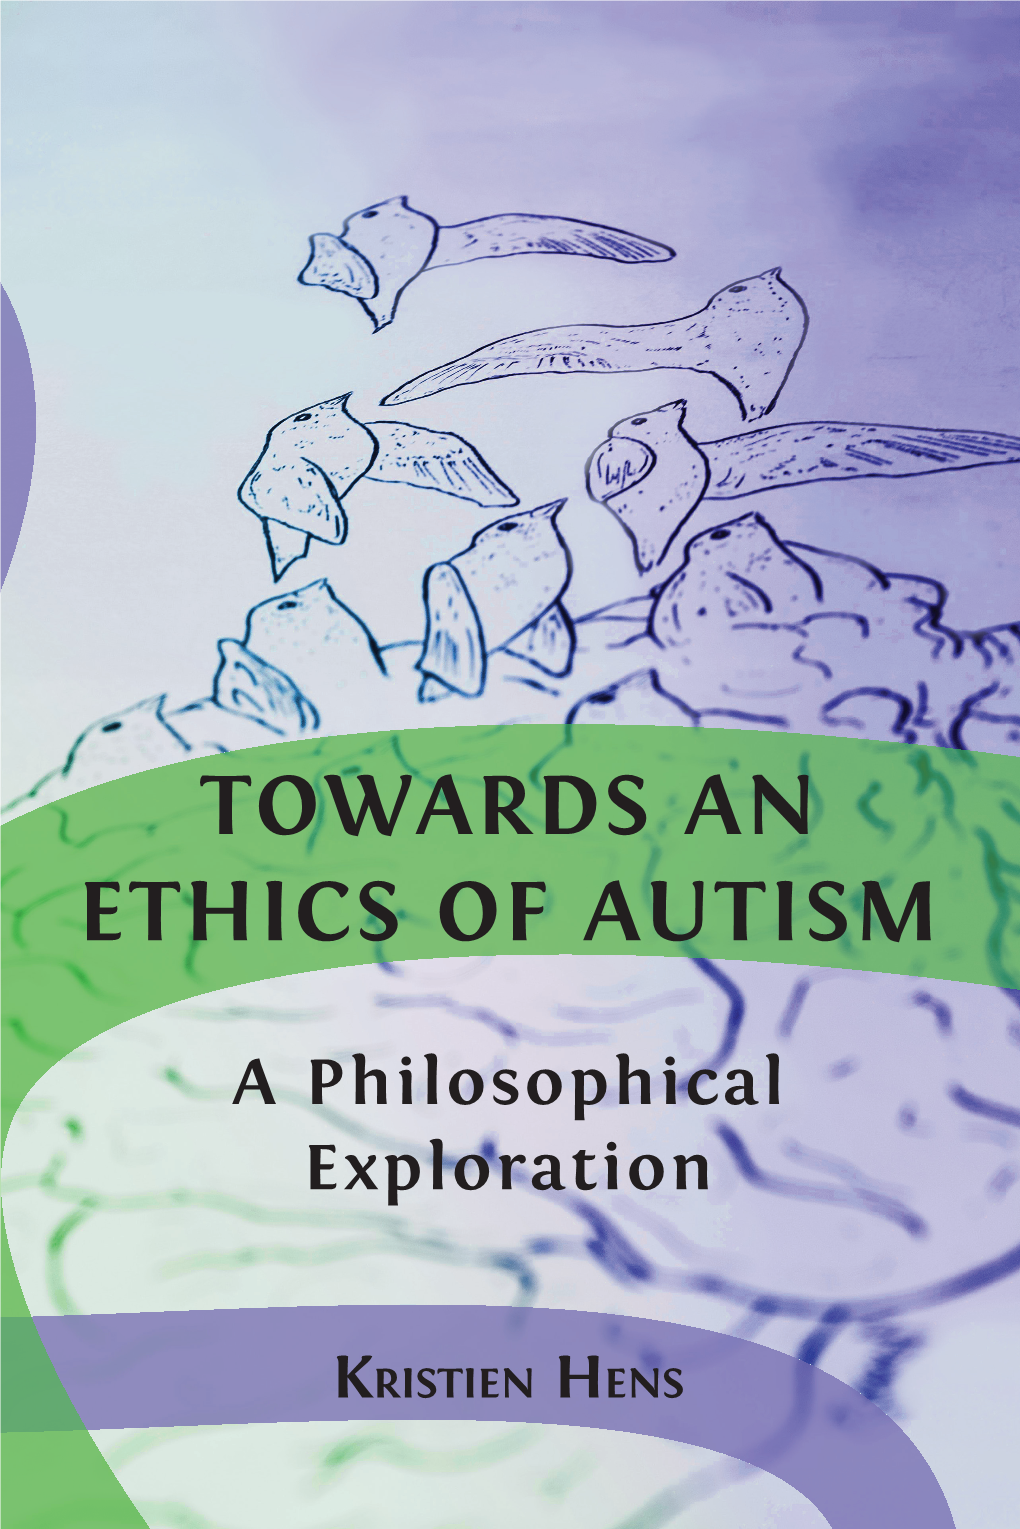 3. Cognitive Explanations of Autism: Beyond Theory of Mind